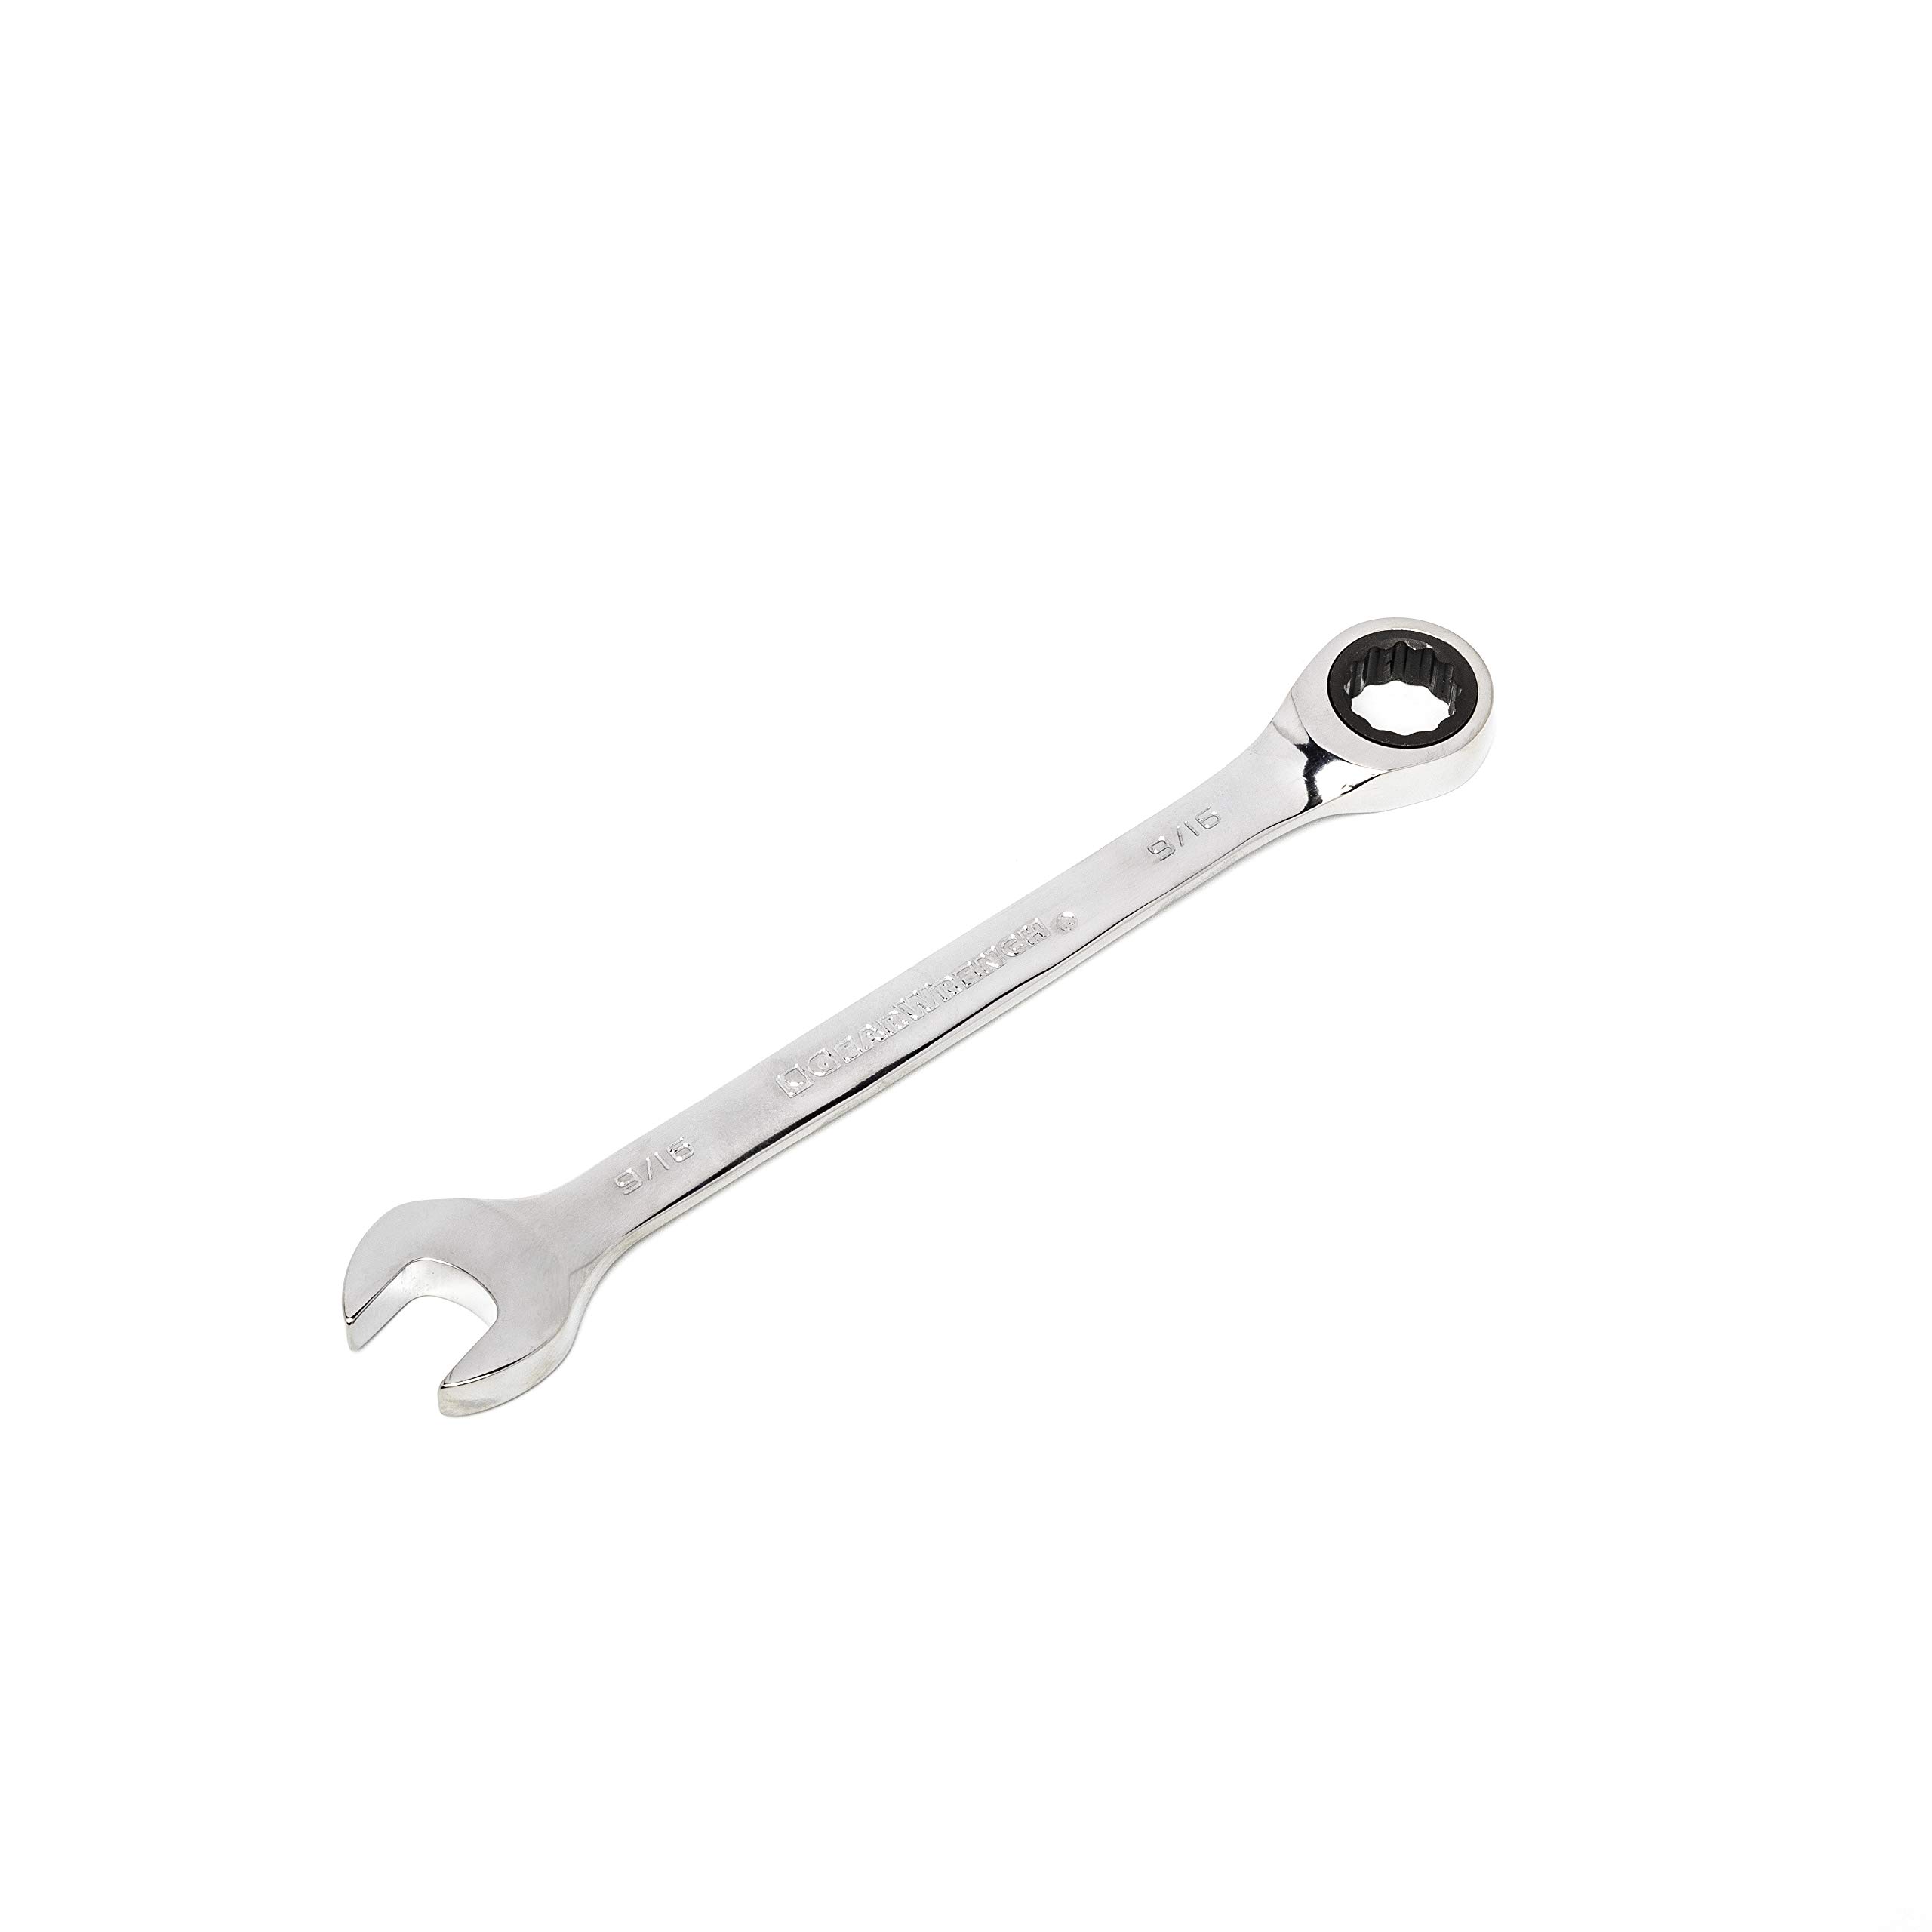 Server with a wrench or tool